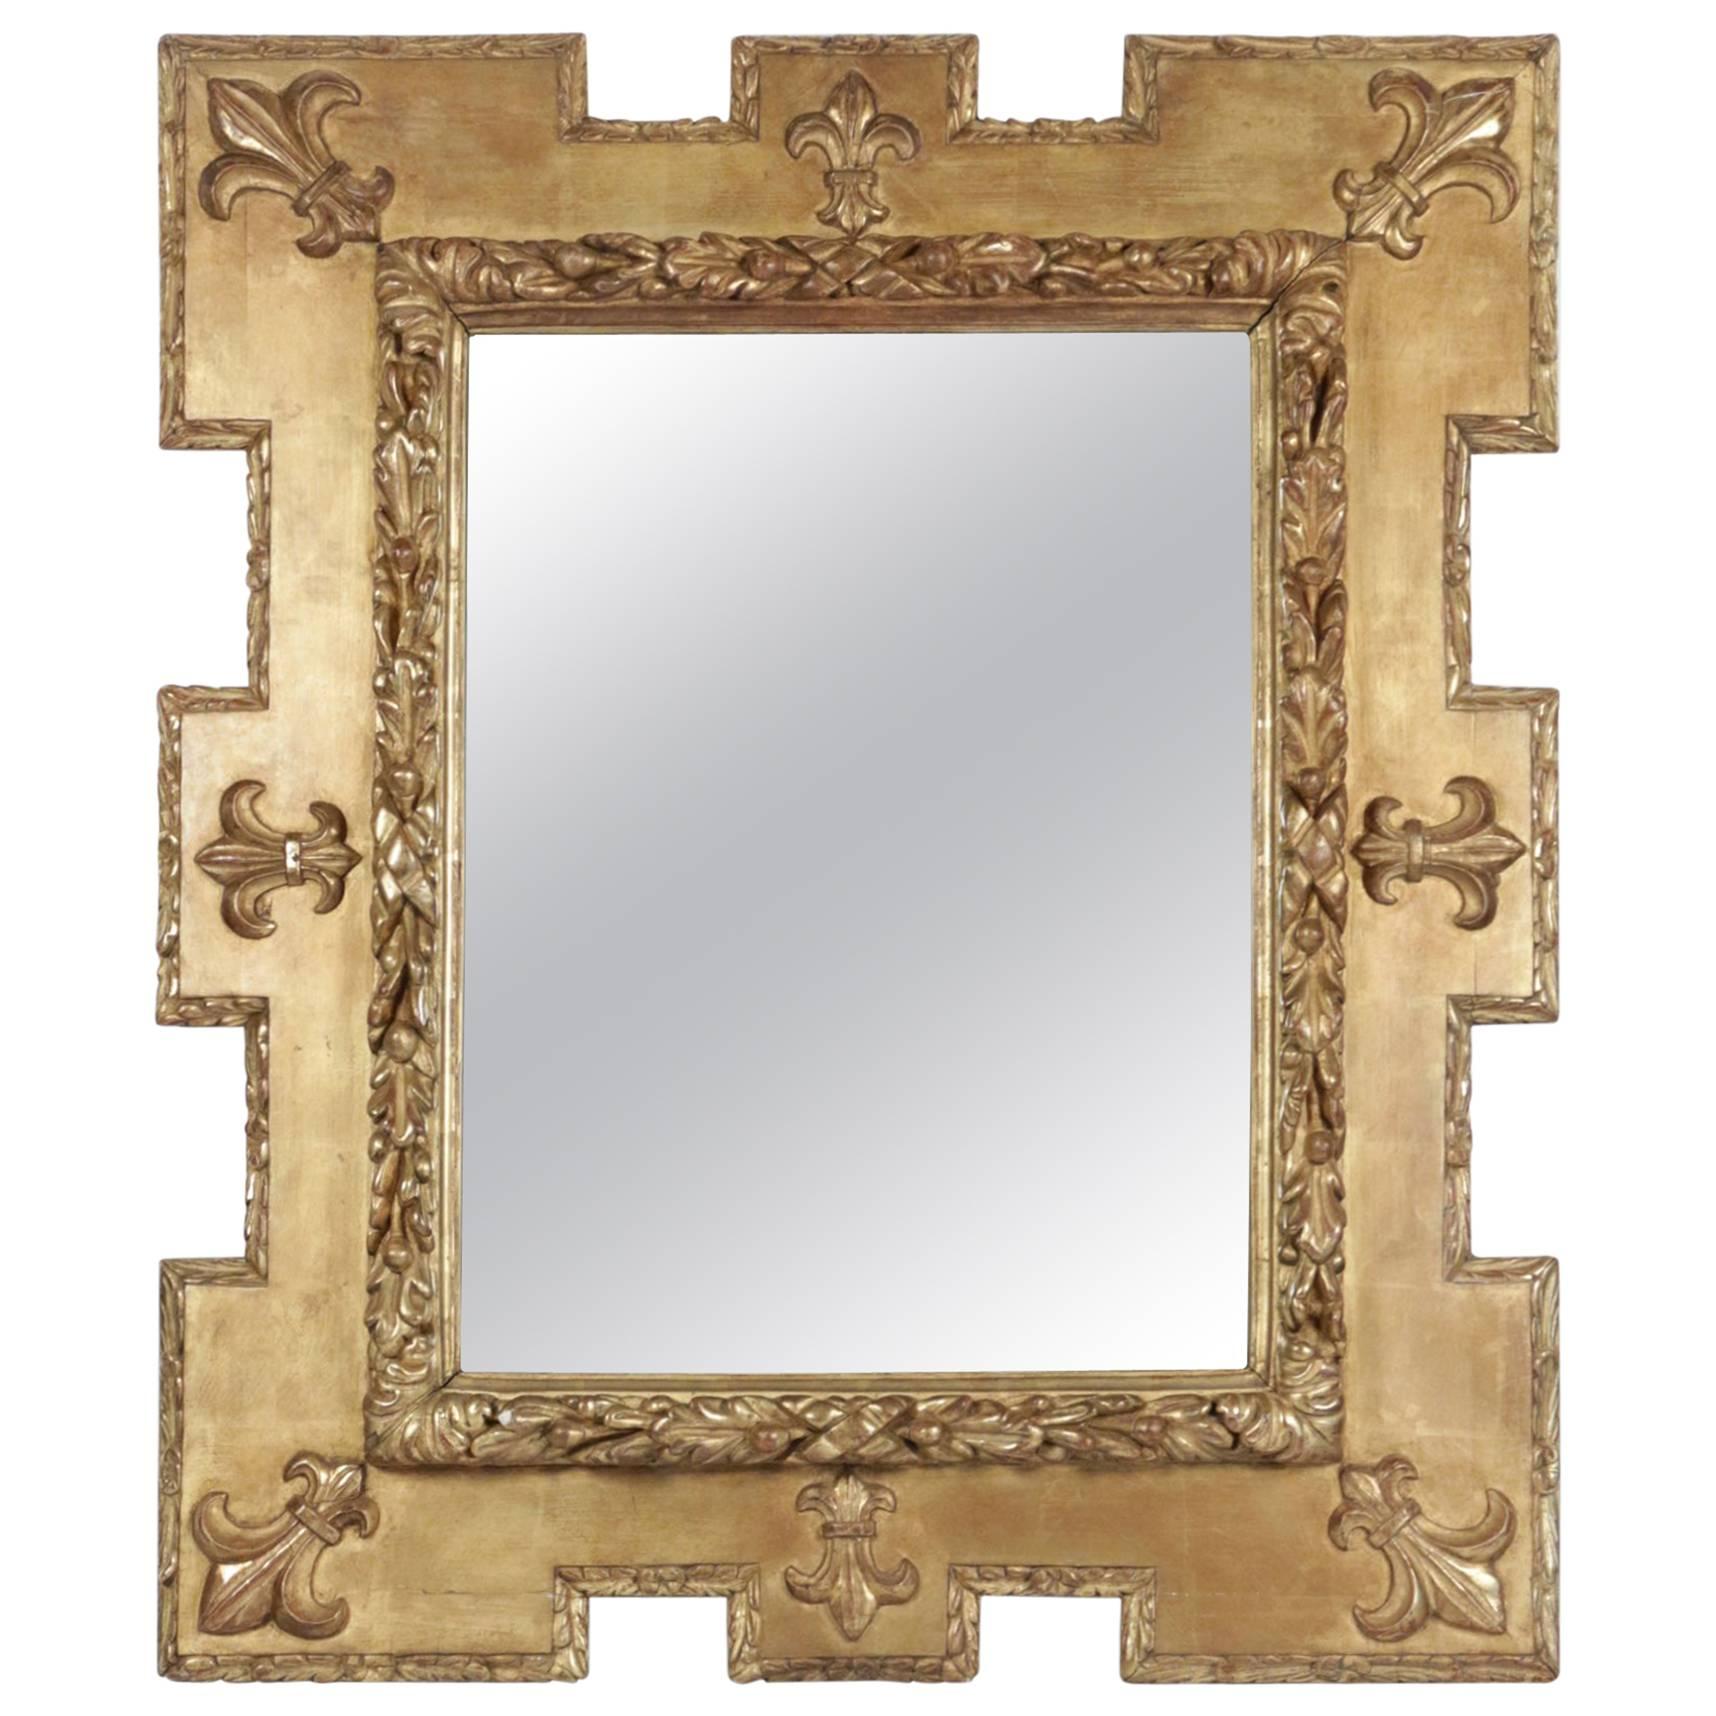 Very Pretty Gold Giltwood and Gesso Mirror with the Fleur De Lys Design